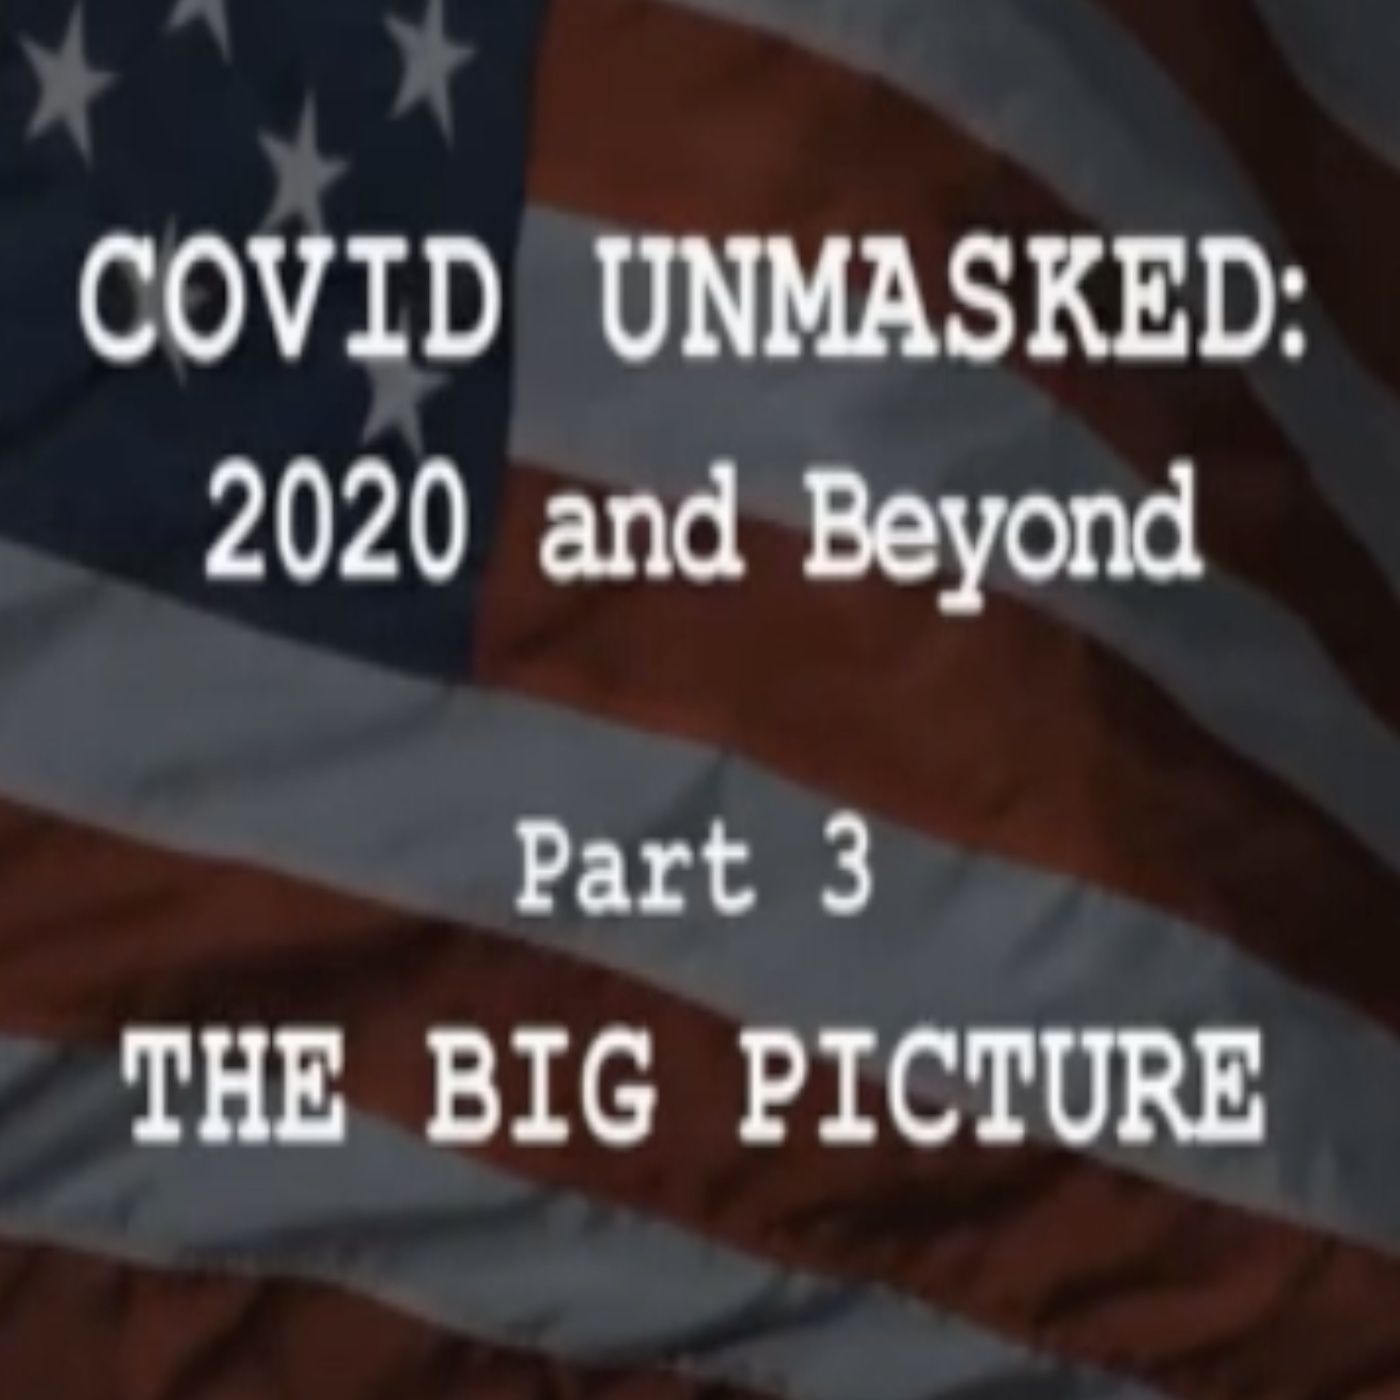 Covid Unmasked part 3 ”The Big Picture”  2020 and Beyond!